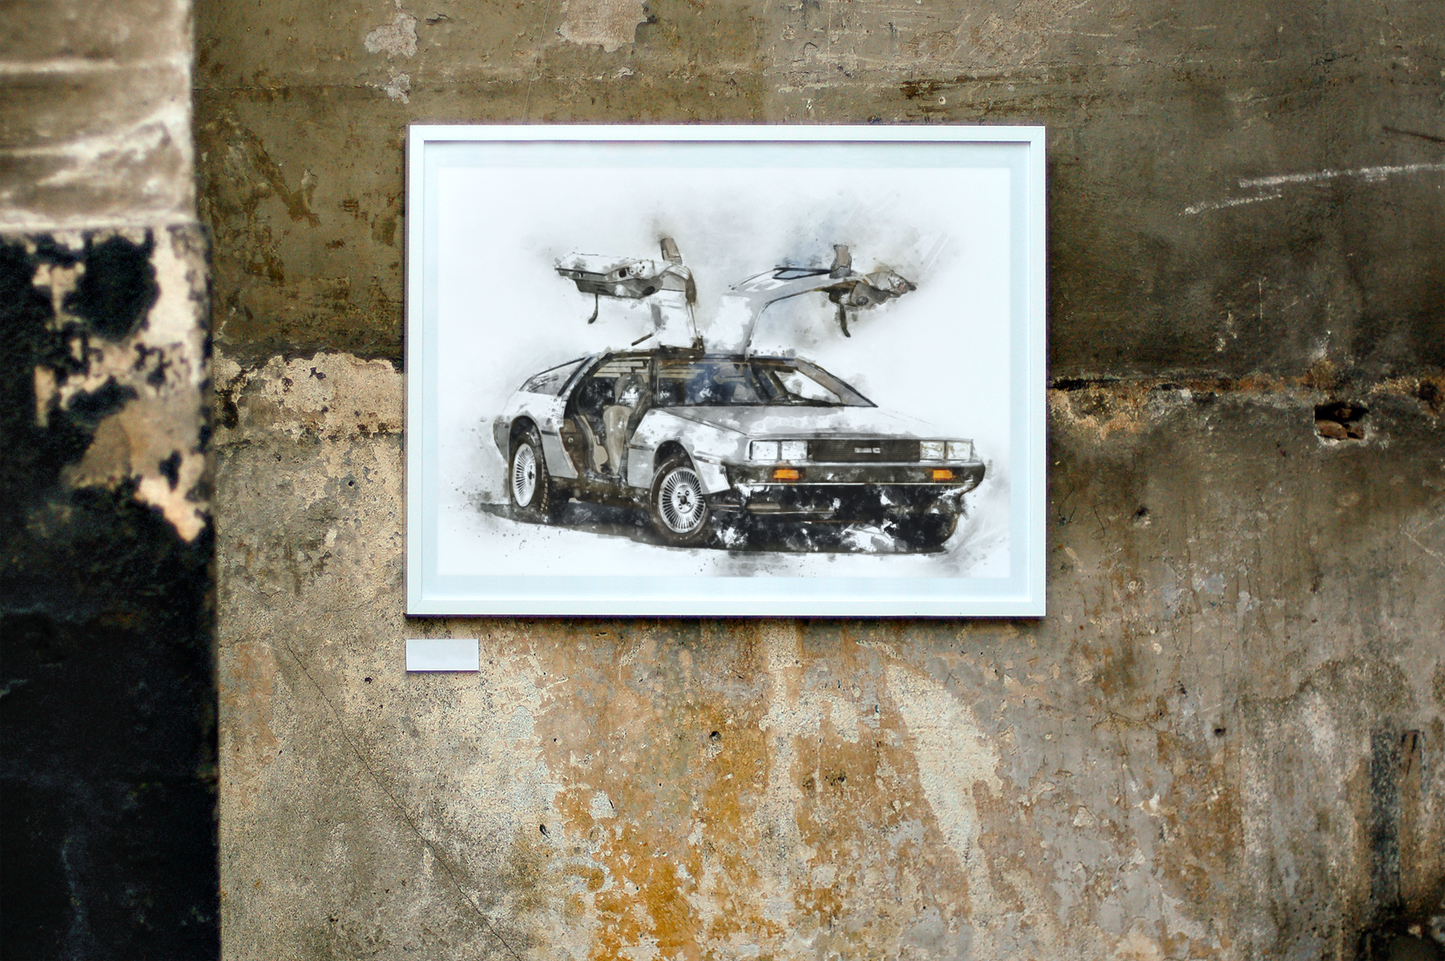 DeLorean Classic Car Wall Art Print - available in different sizes